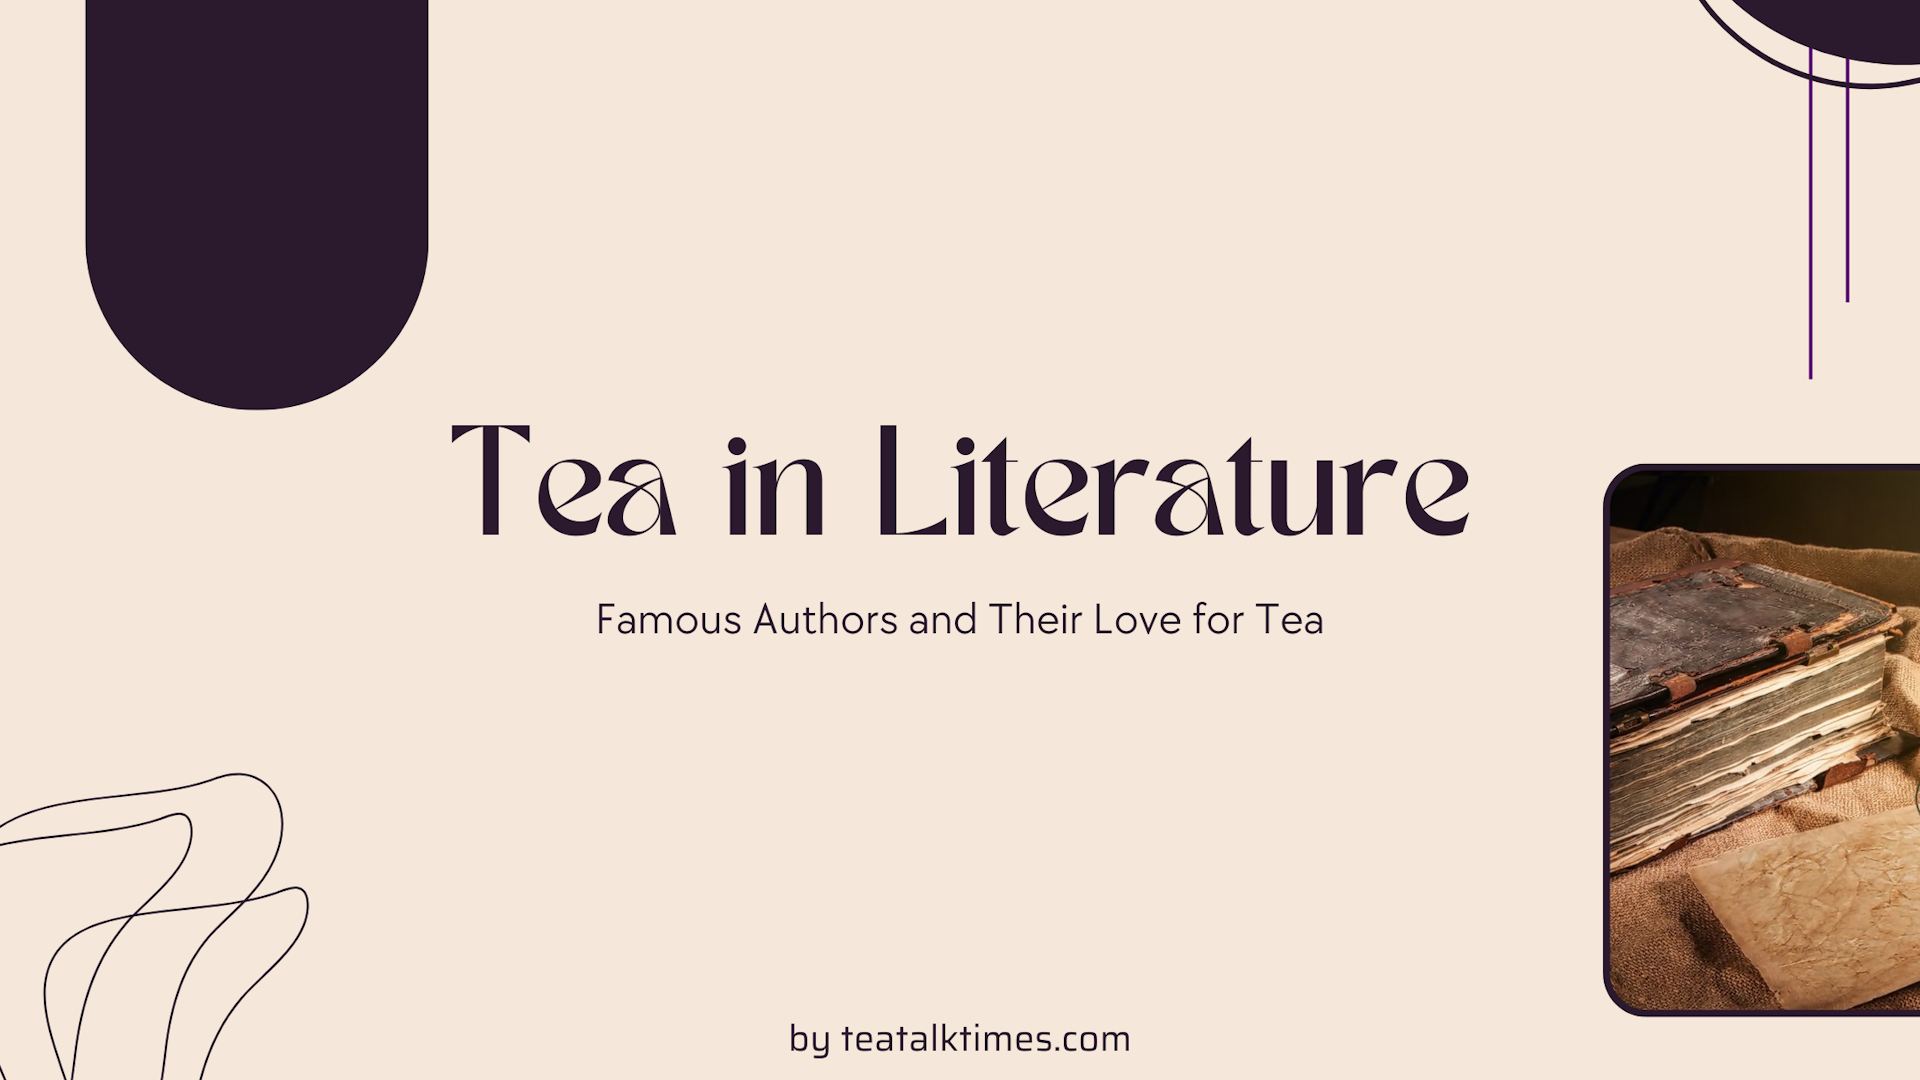 Tea in Literature: Famous Authors and Their Love for Tea